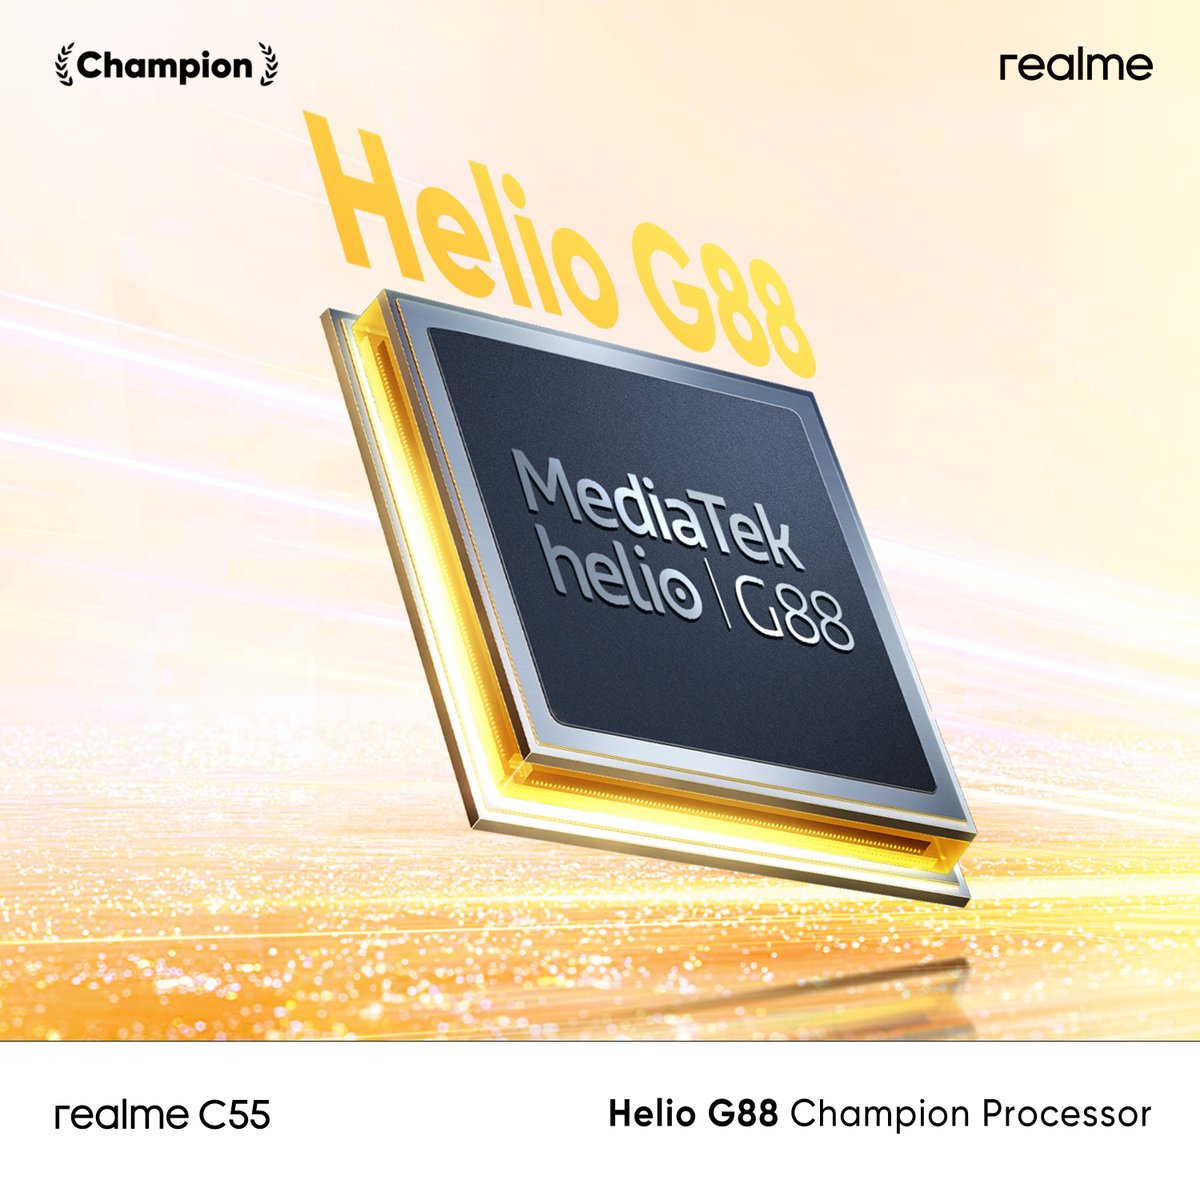 Dominate every task without lag with the MediaTek Helio G88 chipset powering the #realmeC55 #ChampionCamera #ChampionMemory #PowerfulProcessor